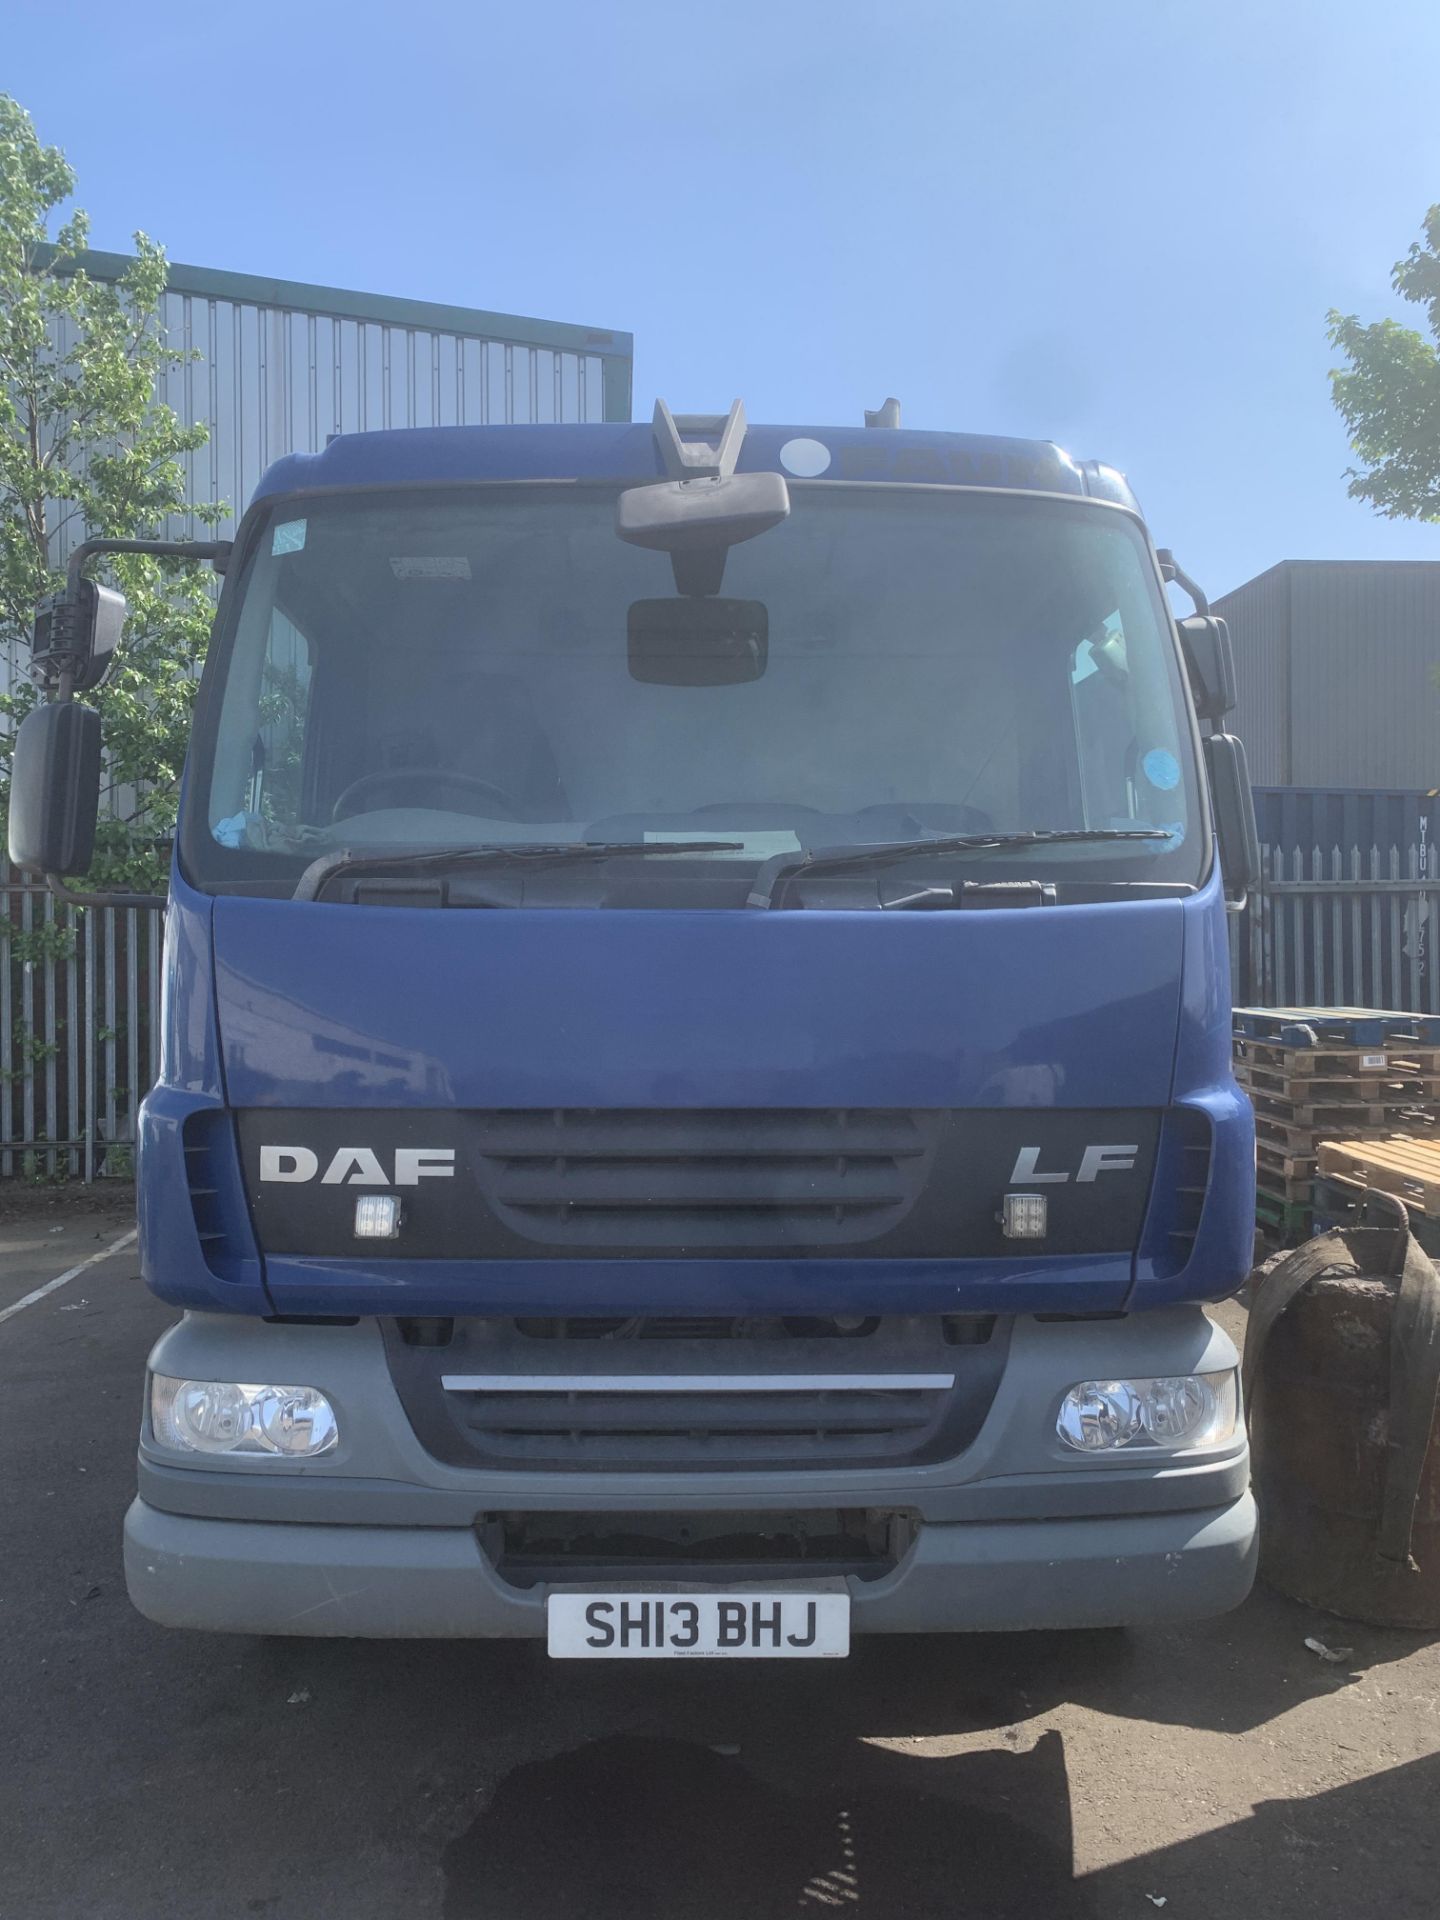 2013 BLUE DAF TRUCKS LF REFUSE COLLECTION VEHICLE - Image 2 of 12